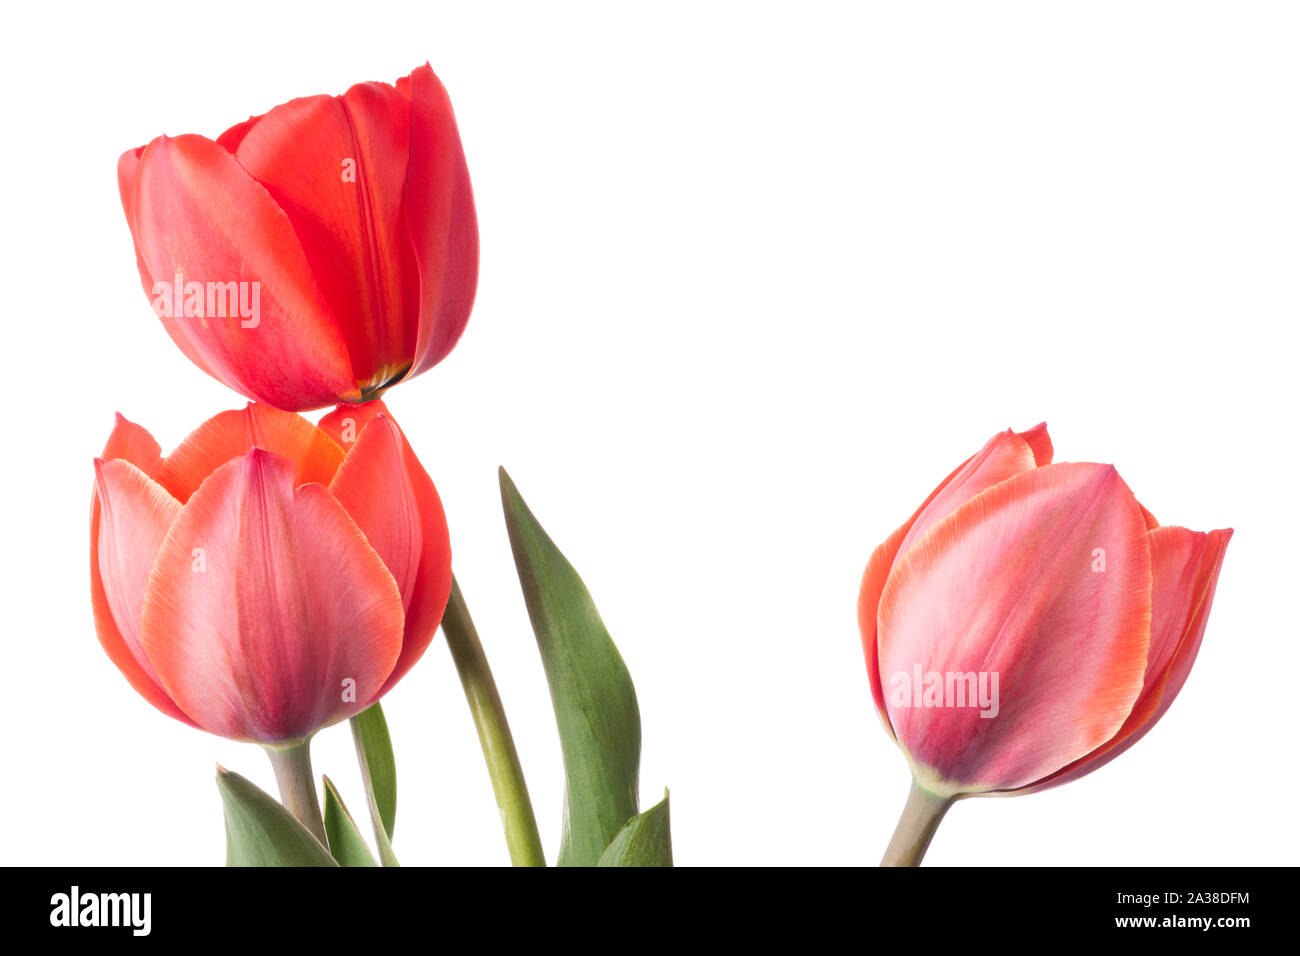 Three tulips isolated on a white background Stock Photo